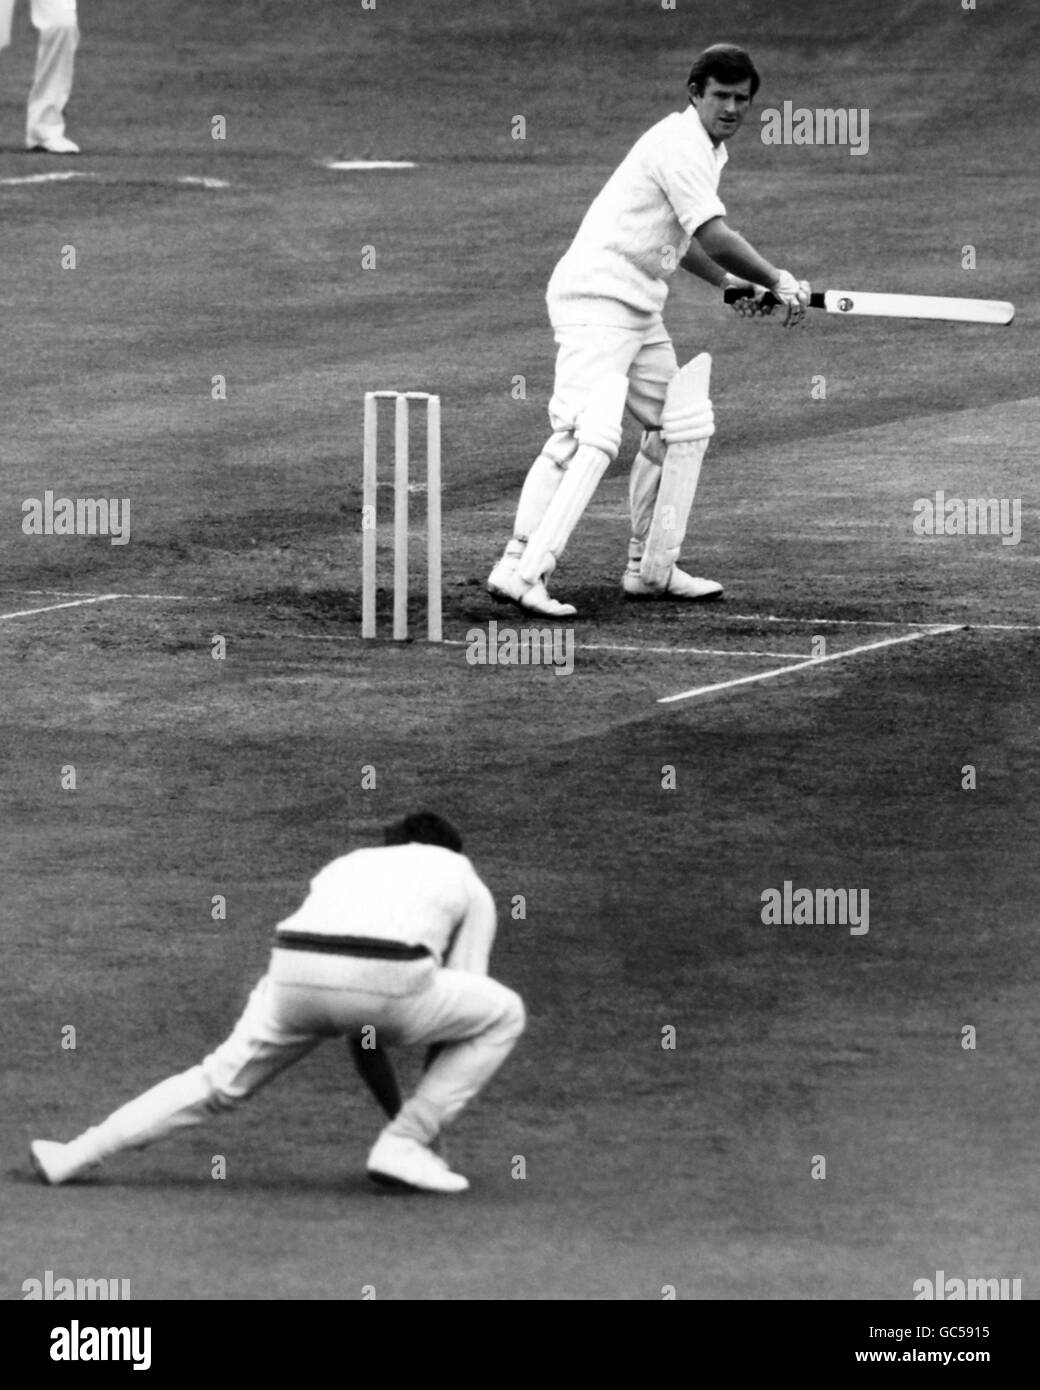 D.L.AMISS is caught by R.M.Cowper, bowled G.D.Mokenzite for a duck, during England's first innings against Australia in the first Test at Old Trafford, Manchester, today. Stock Photo